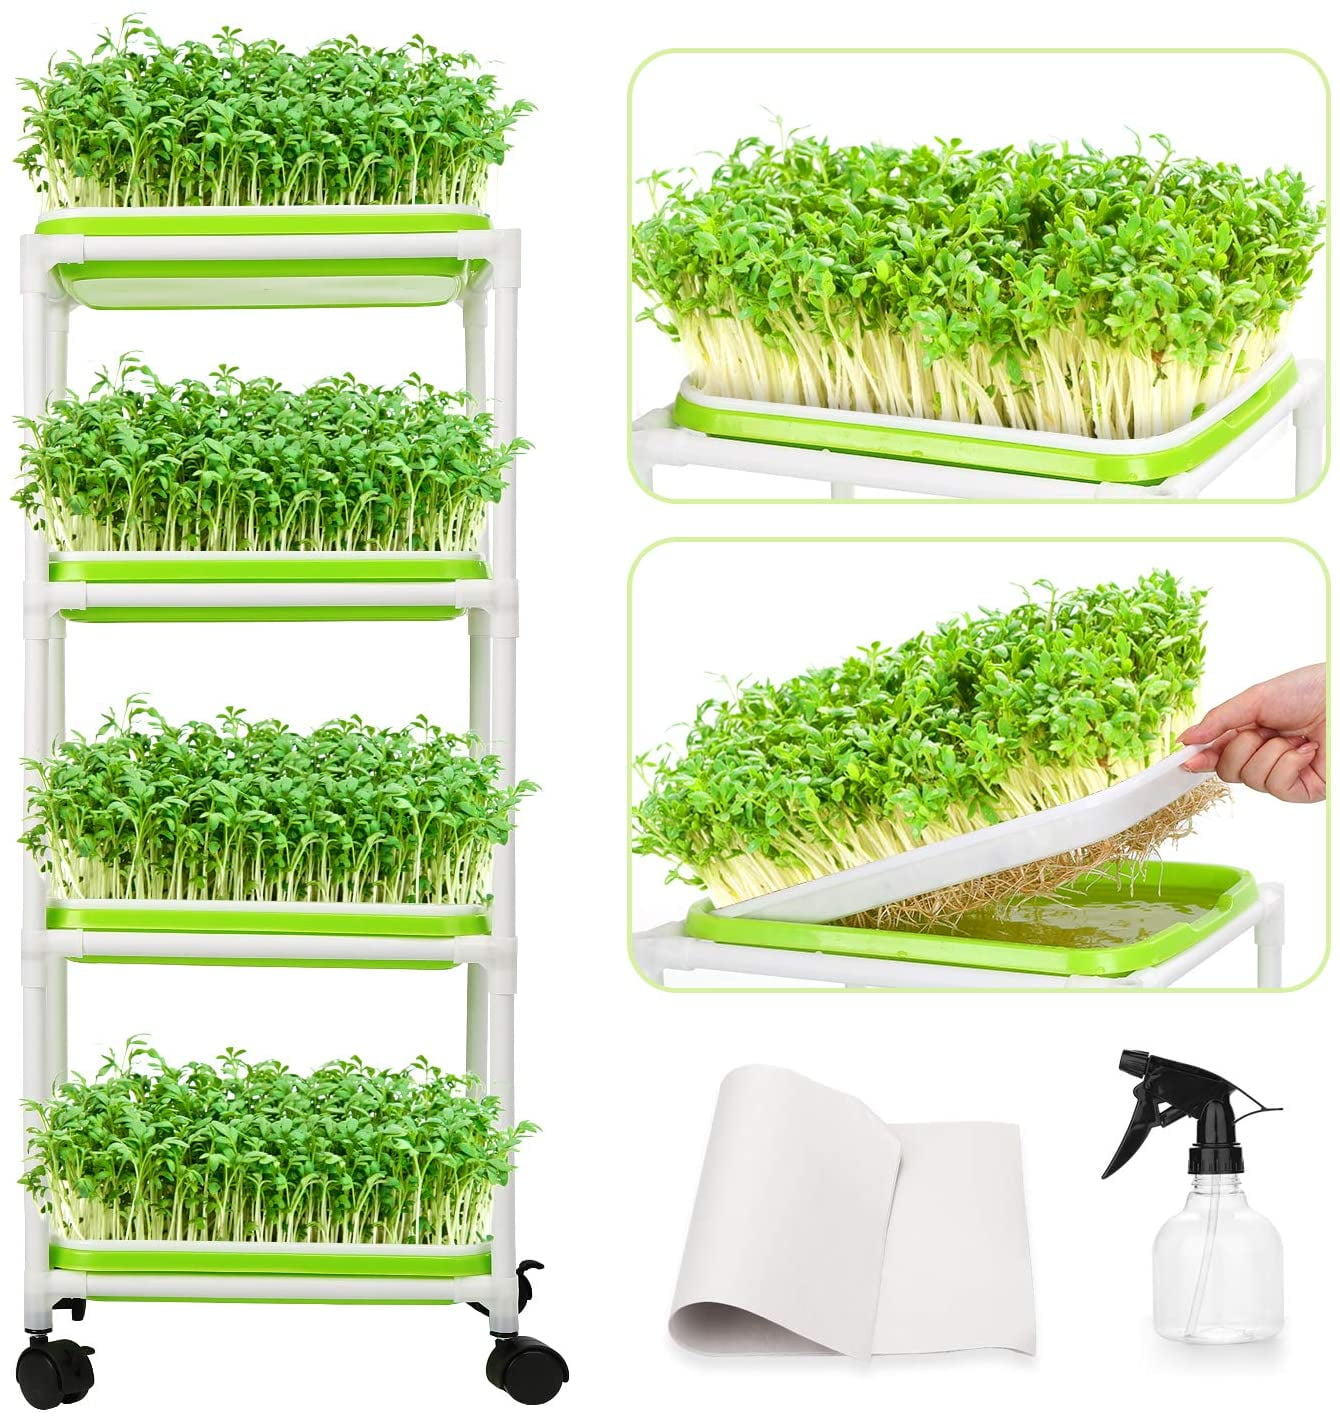 Seed Sprouter Tray Soil-Free Big Capacity Germination Grow Box Grass Plant M7F2 